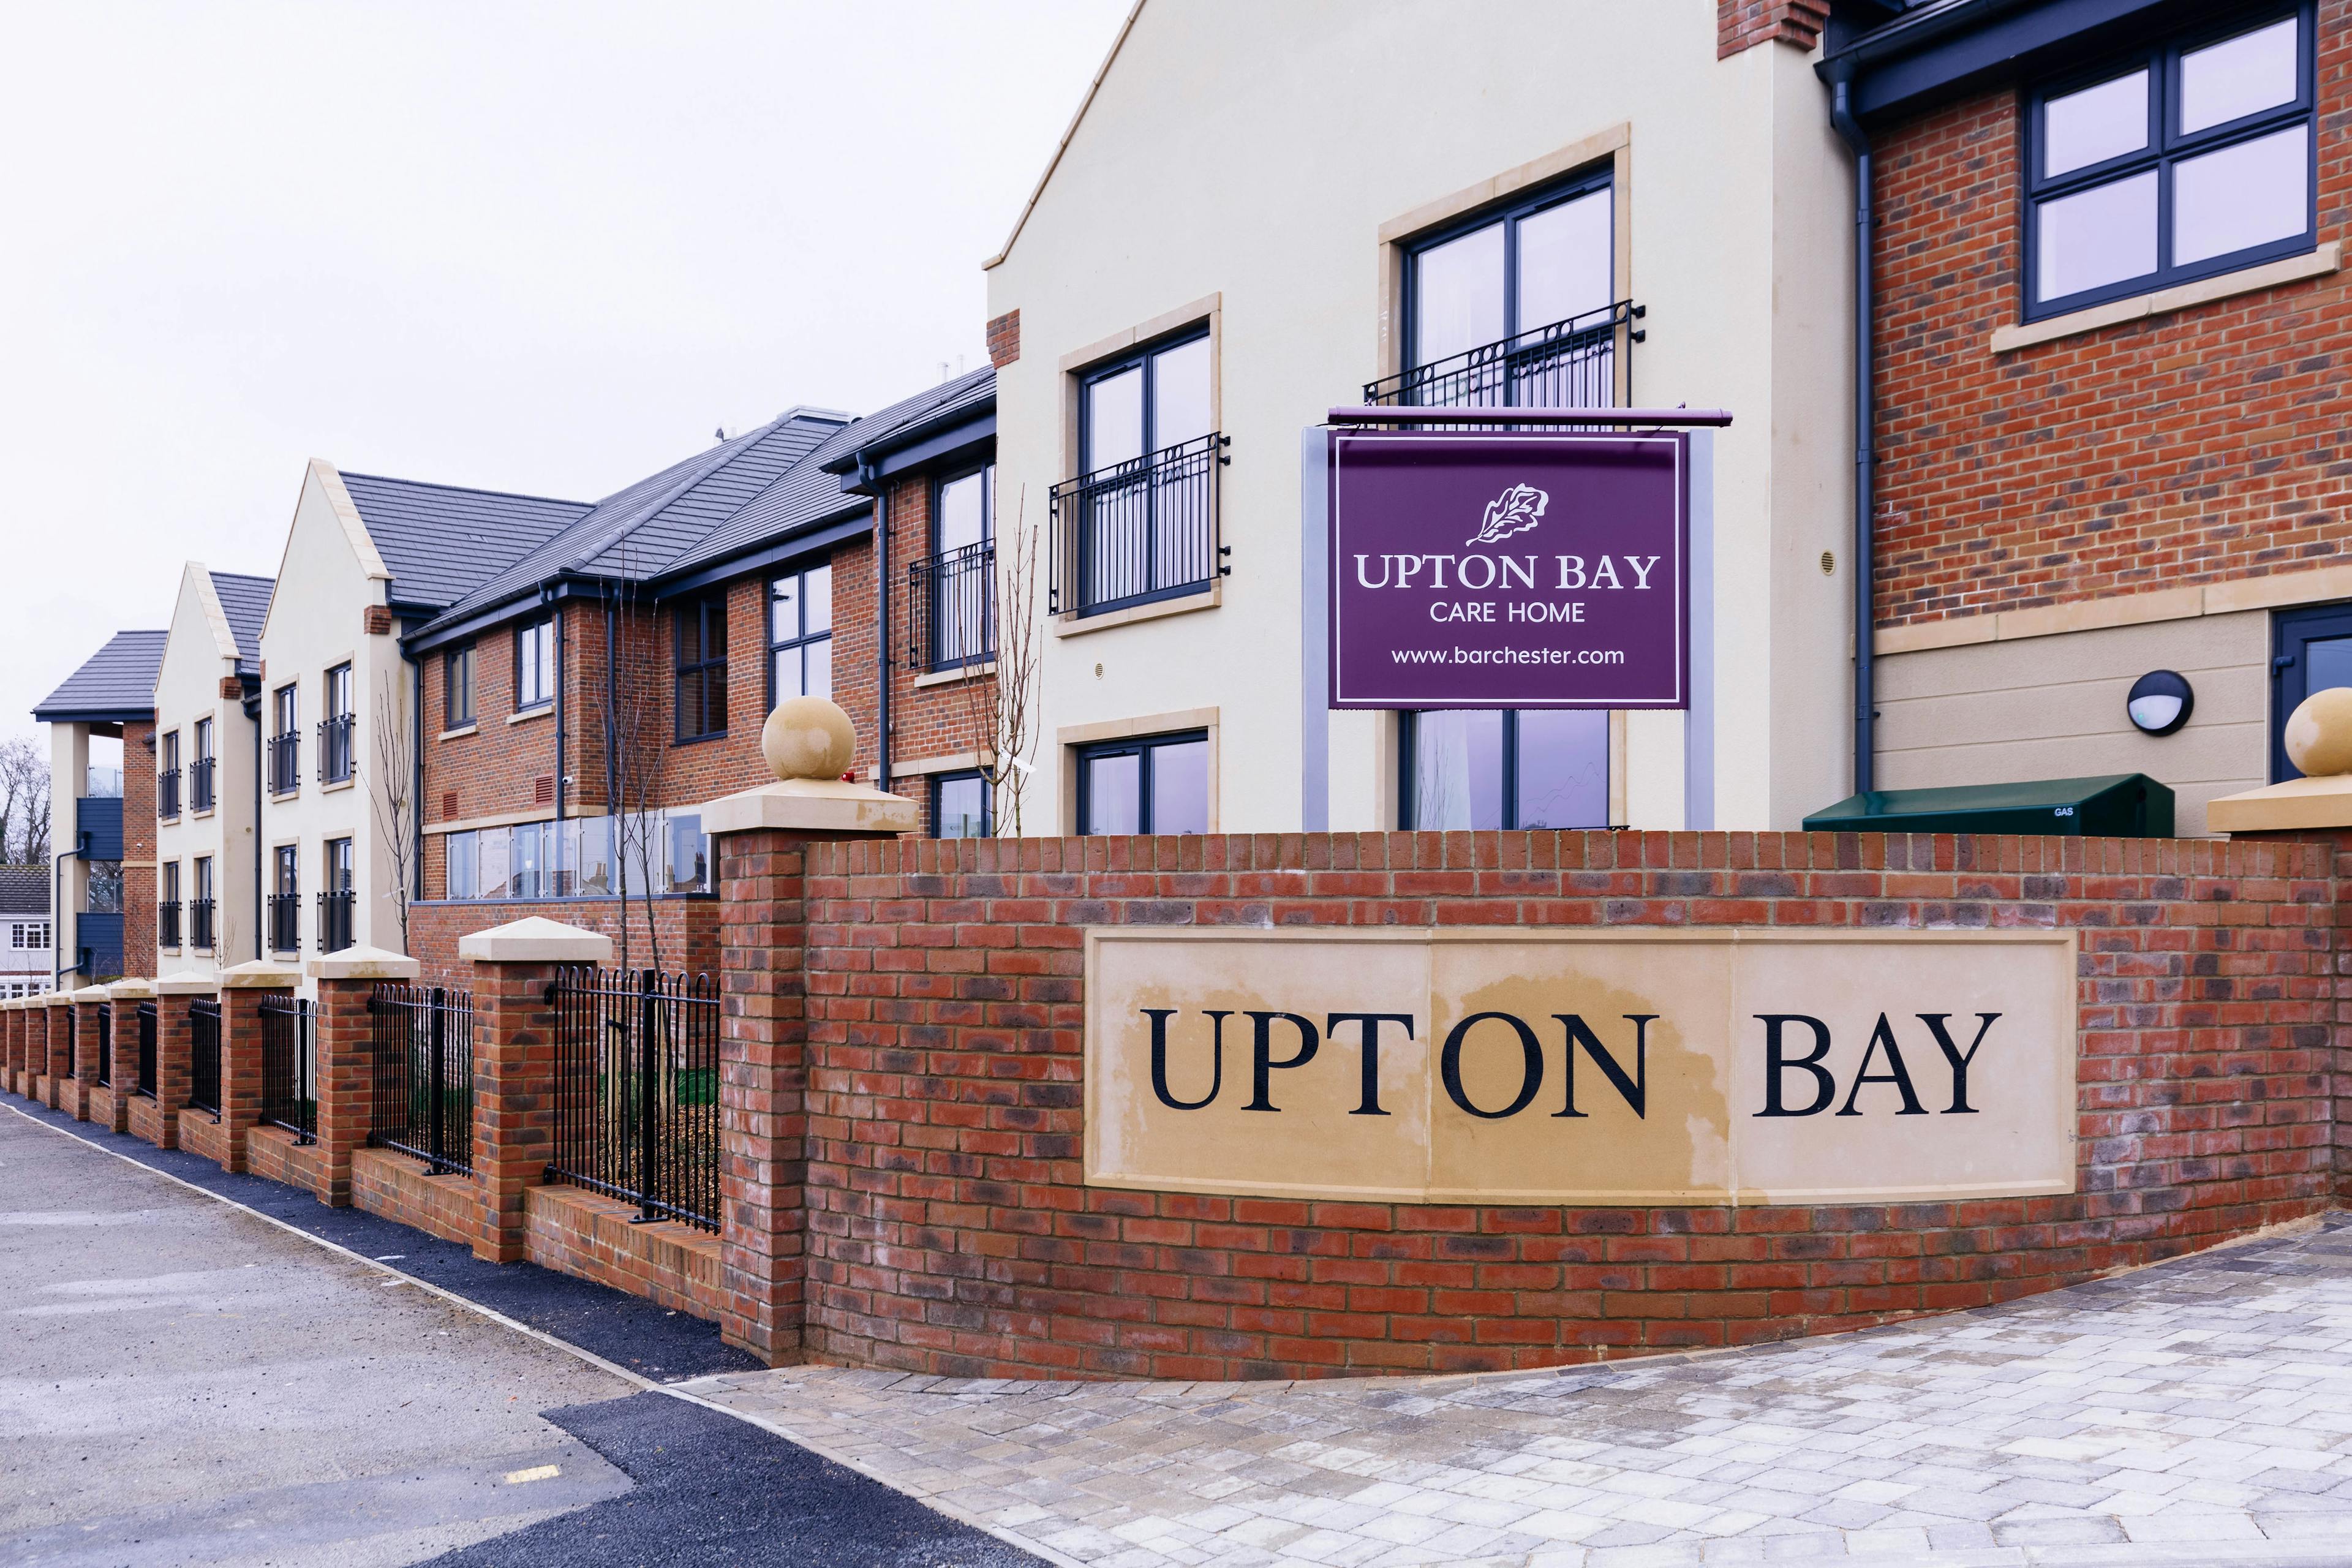 Exterior of Upton Bay Care Home in Poole, Dorset